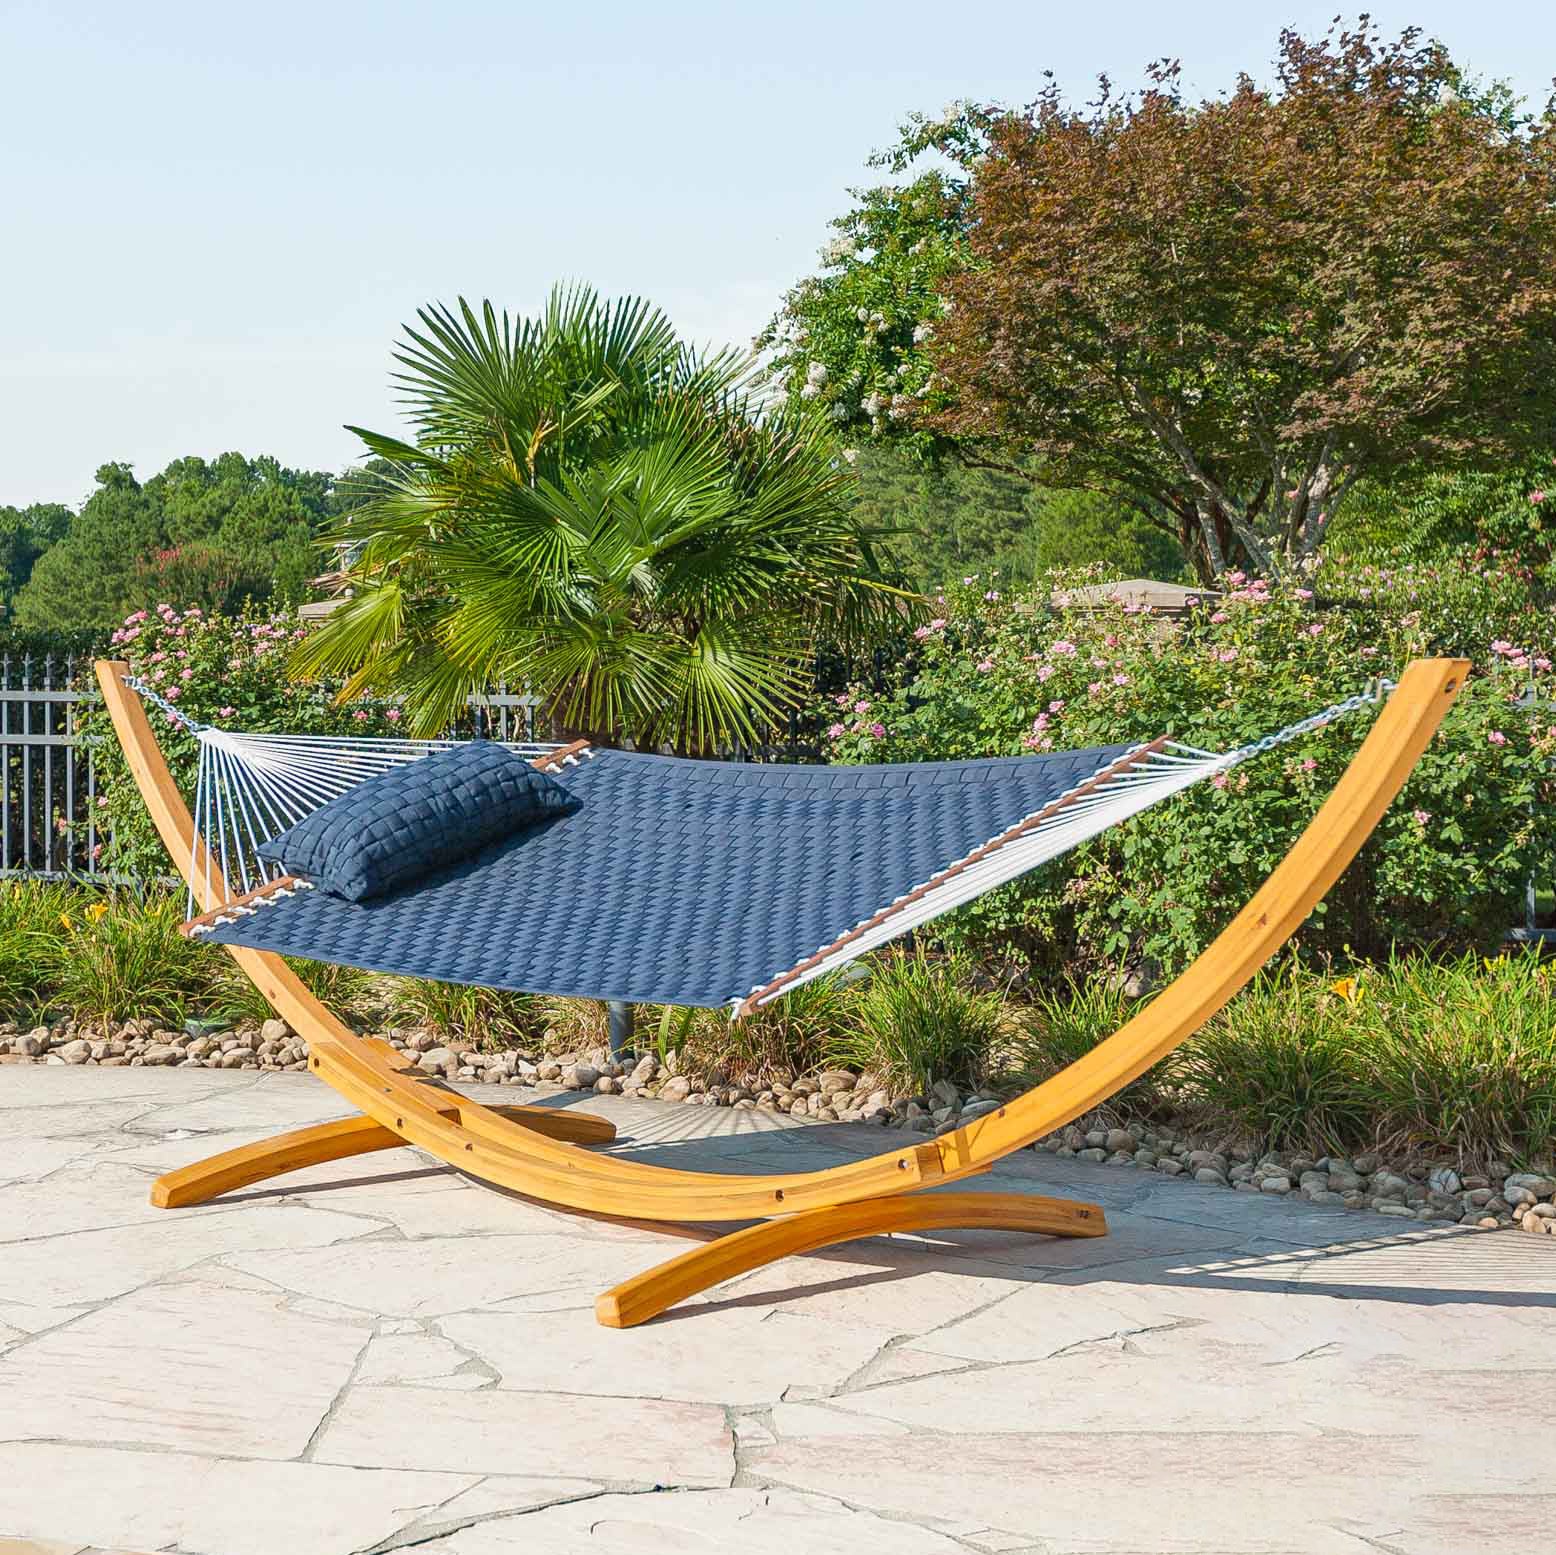 Patio Accessories such as Umbrellas, Firepits, Hammocks and more to compliment any style.